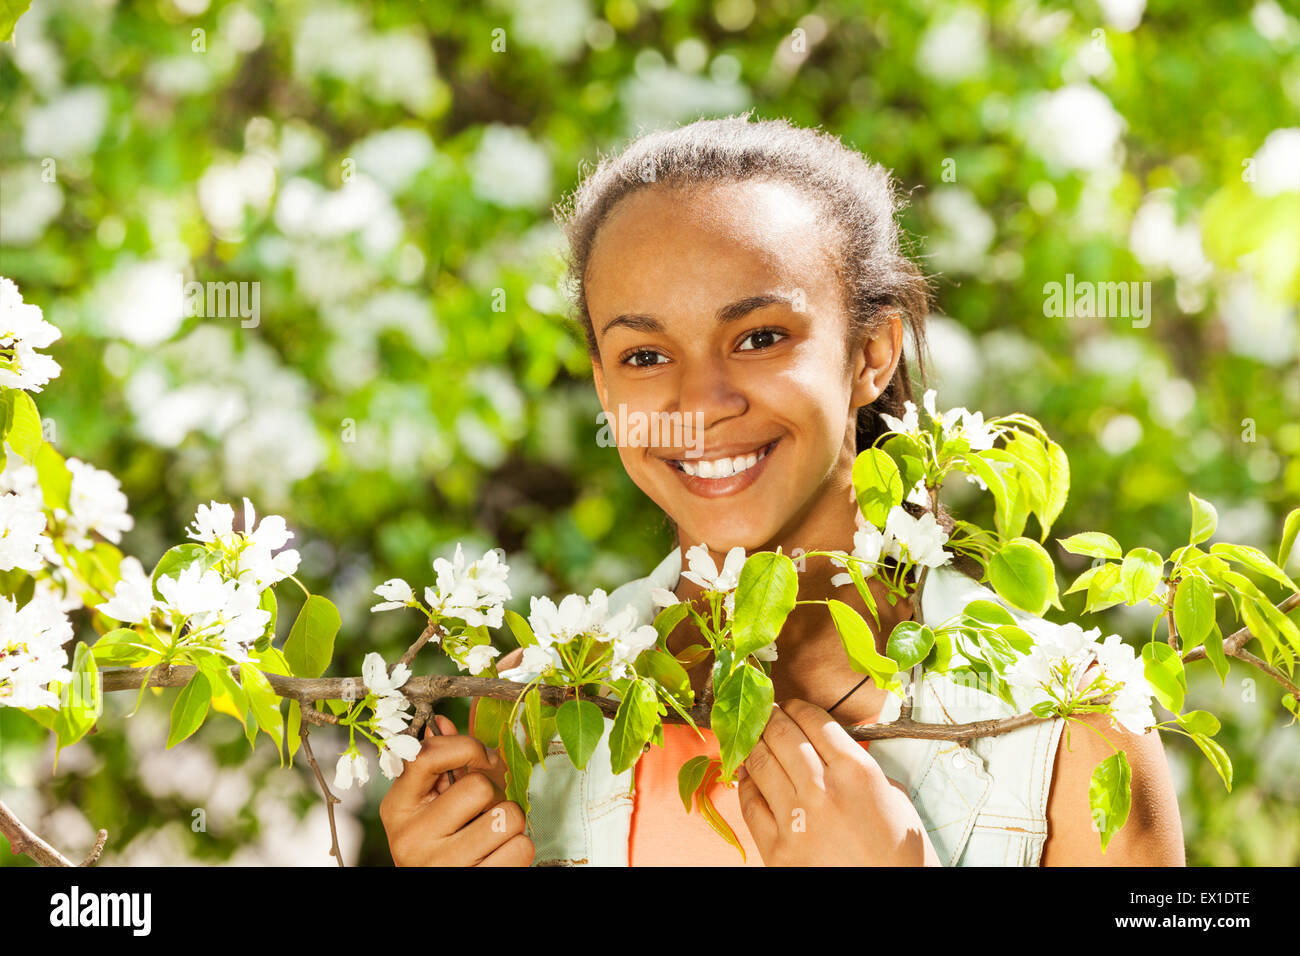 African teenager girl holds white pear flowers Stock Photo